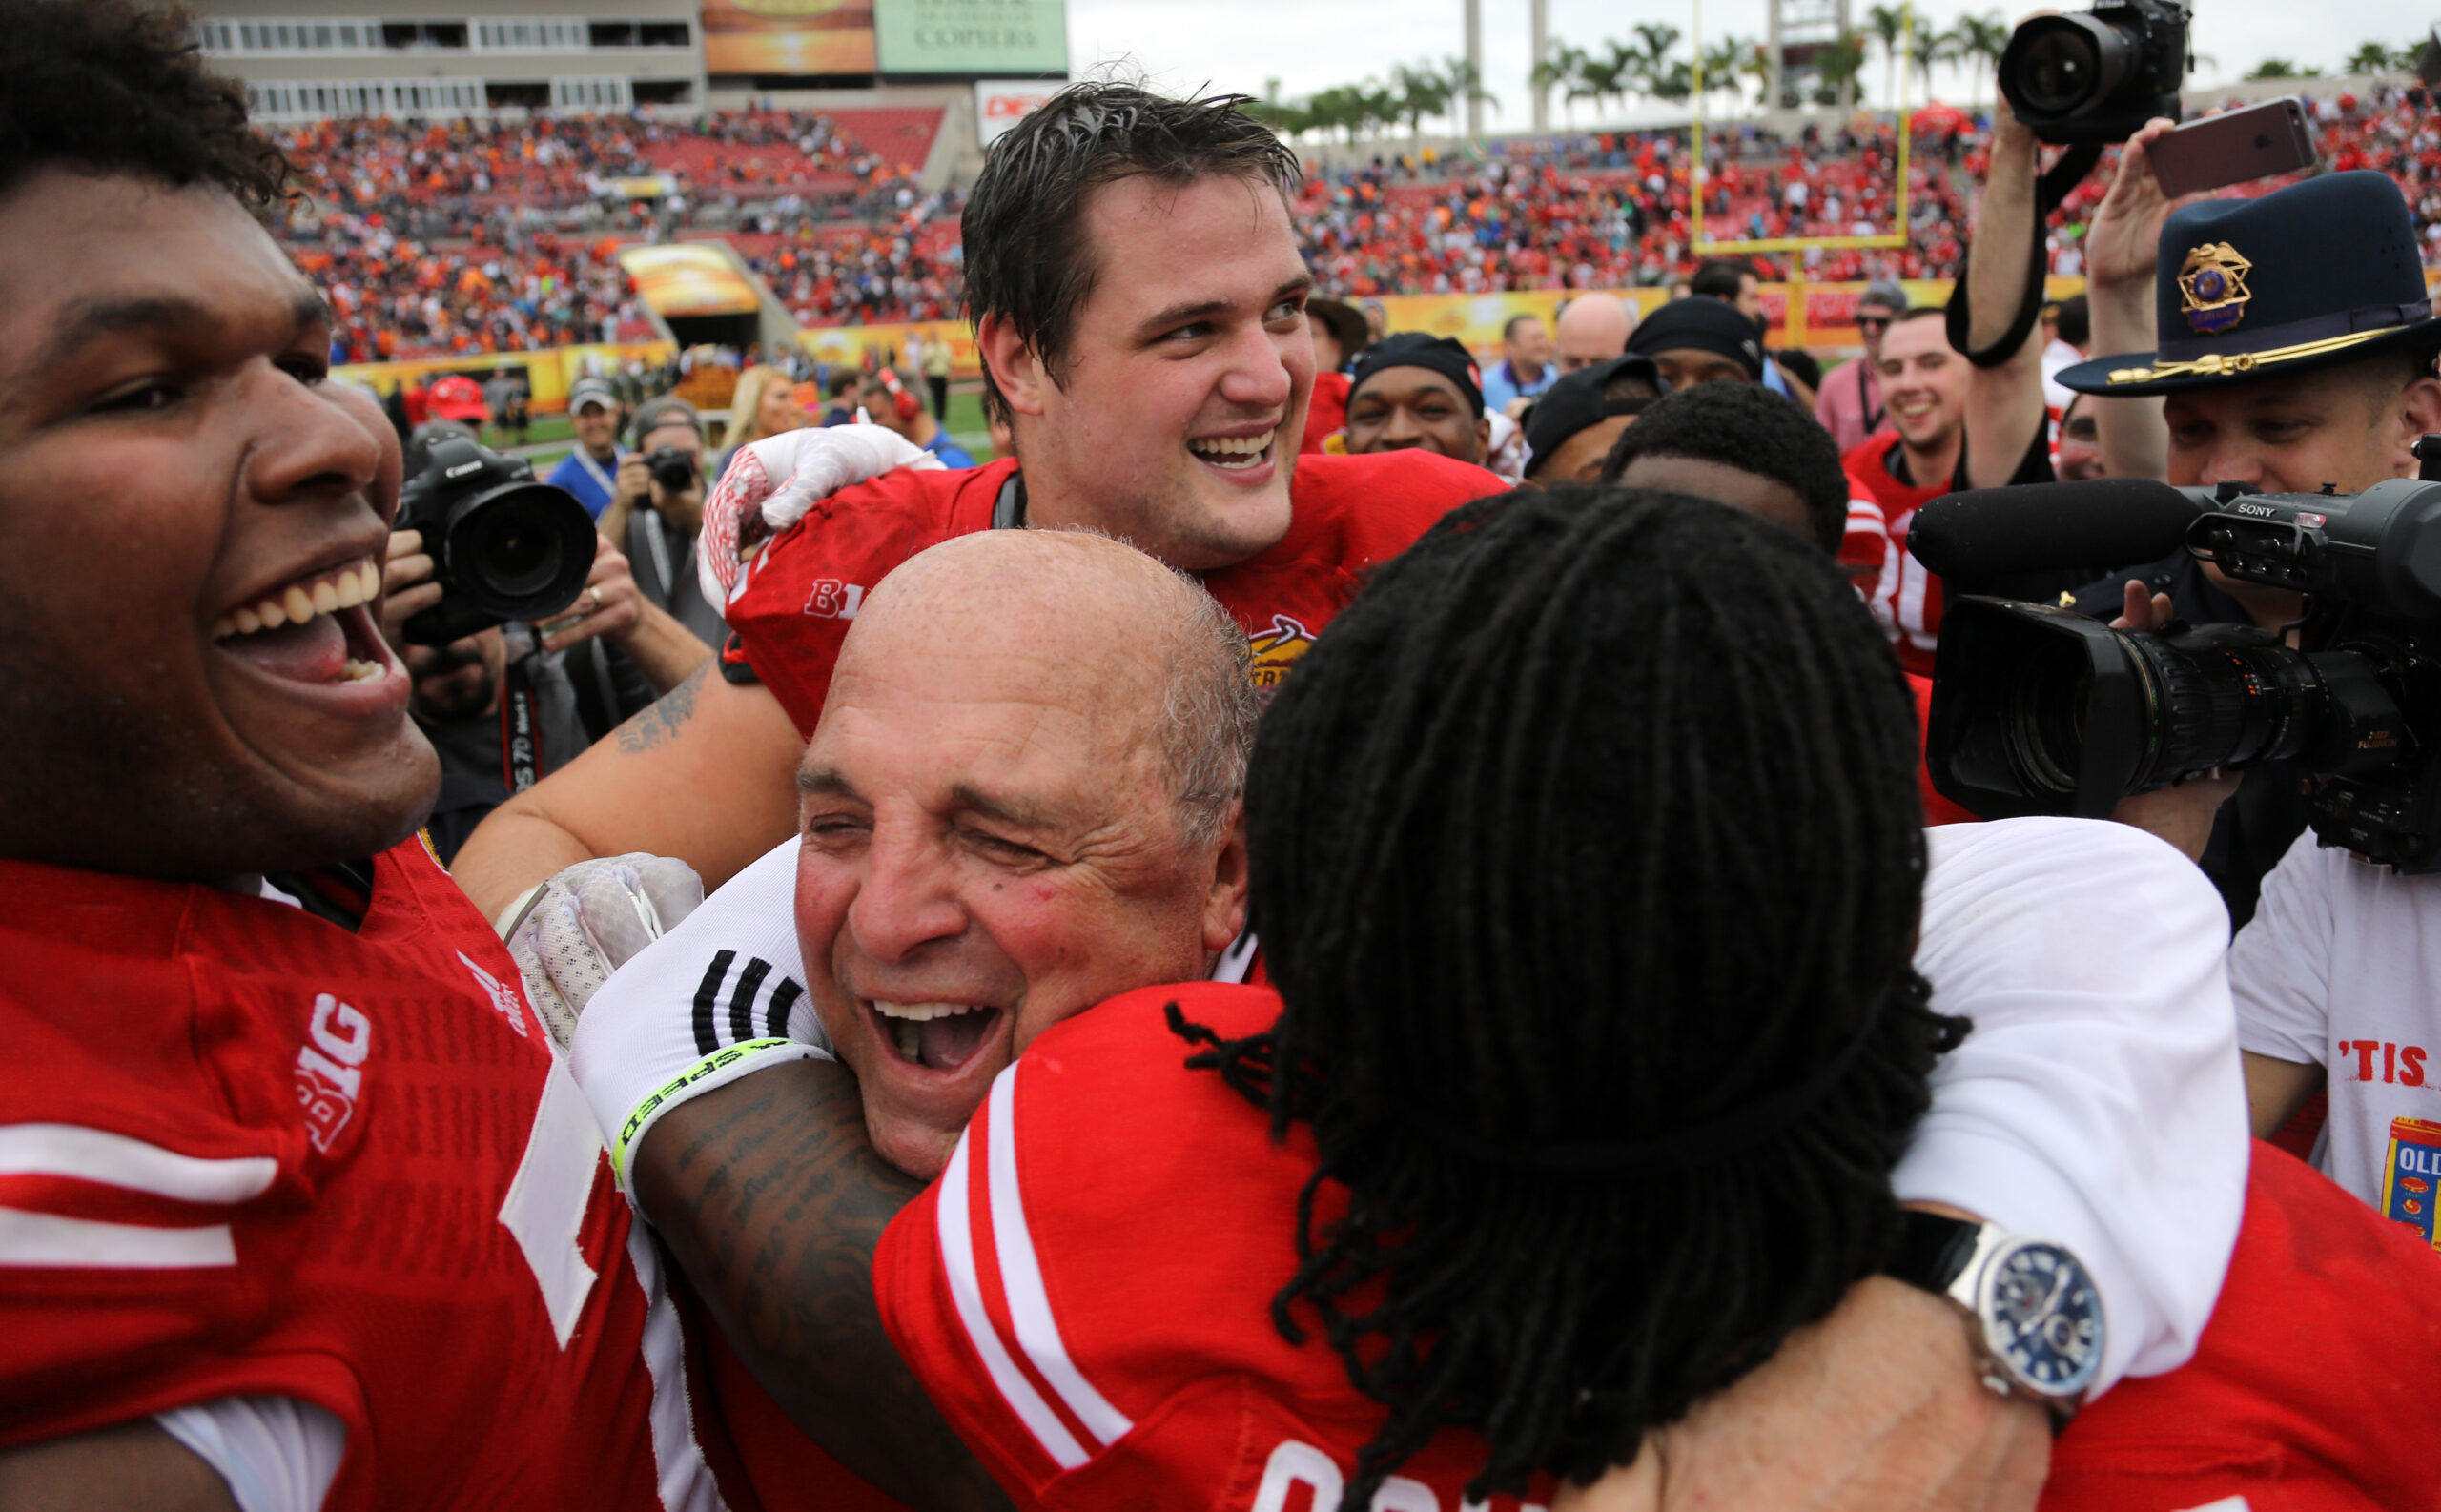 Barry Alvarez hugs a player after a win at the Outback Bowl